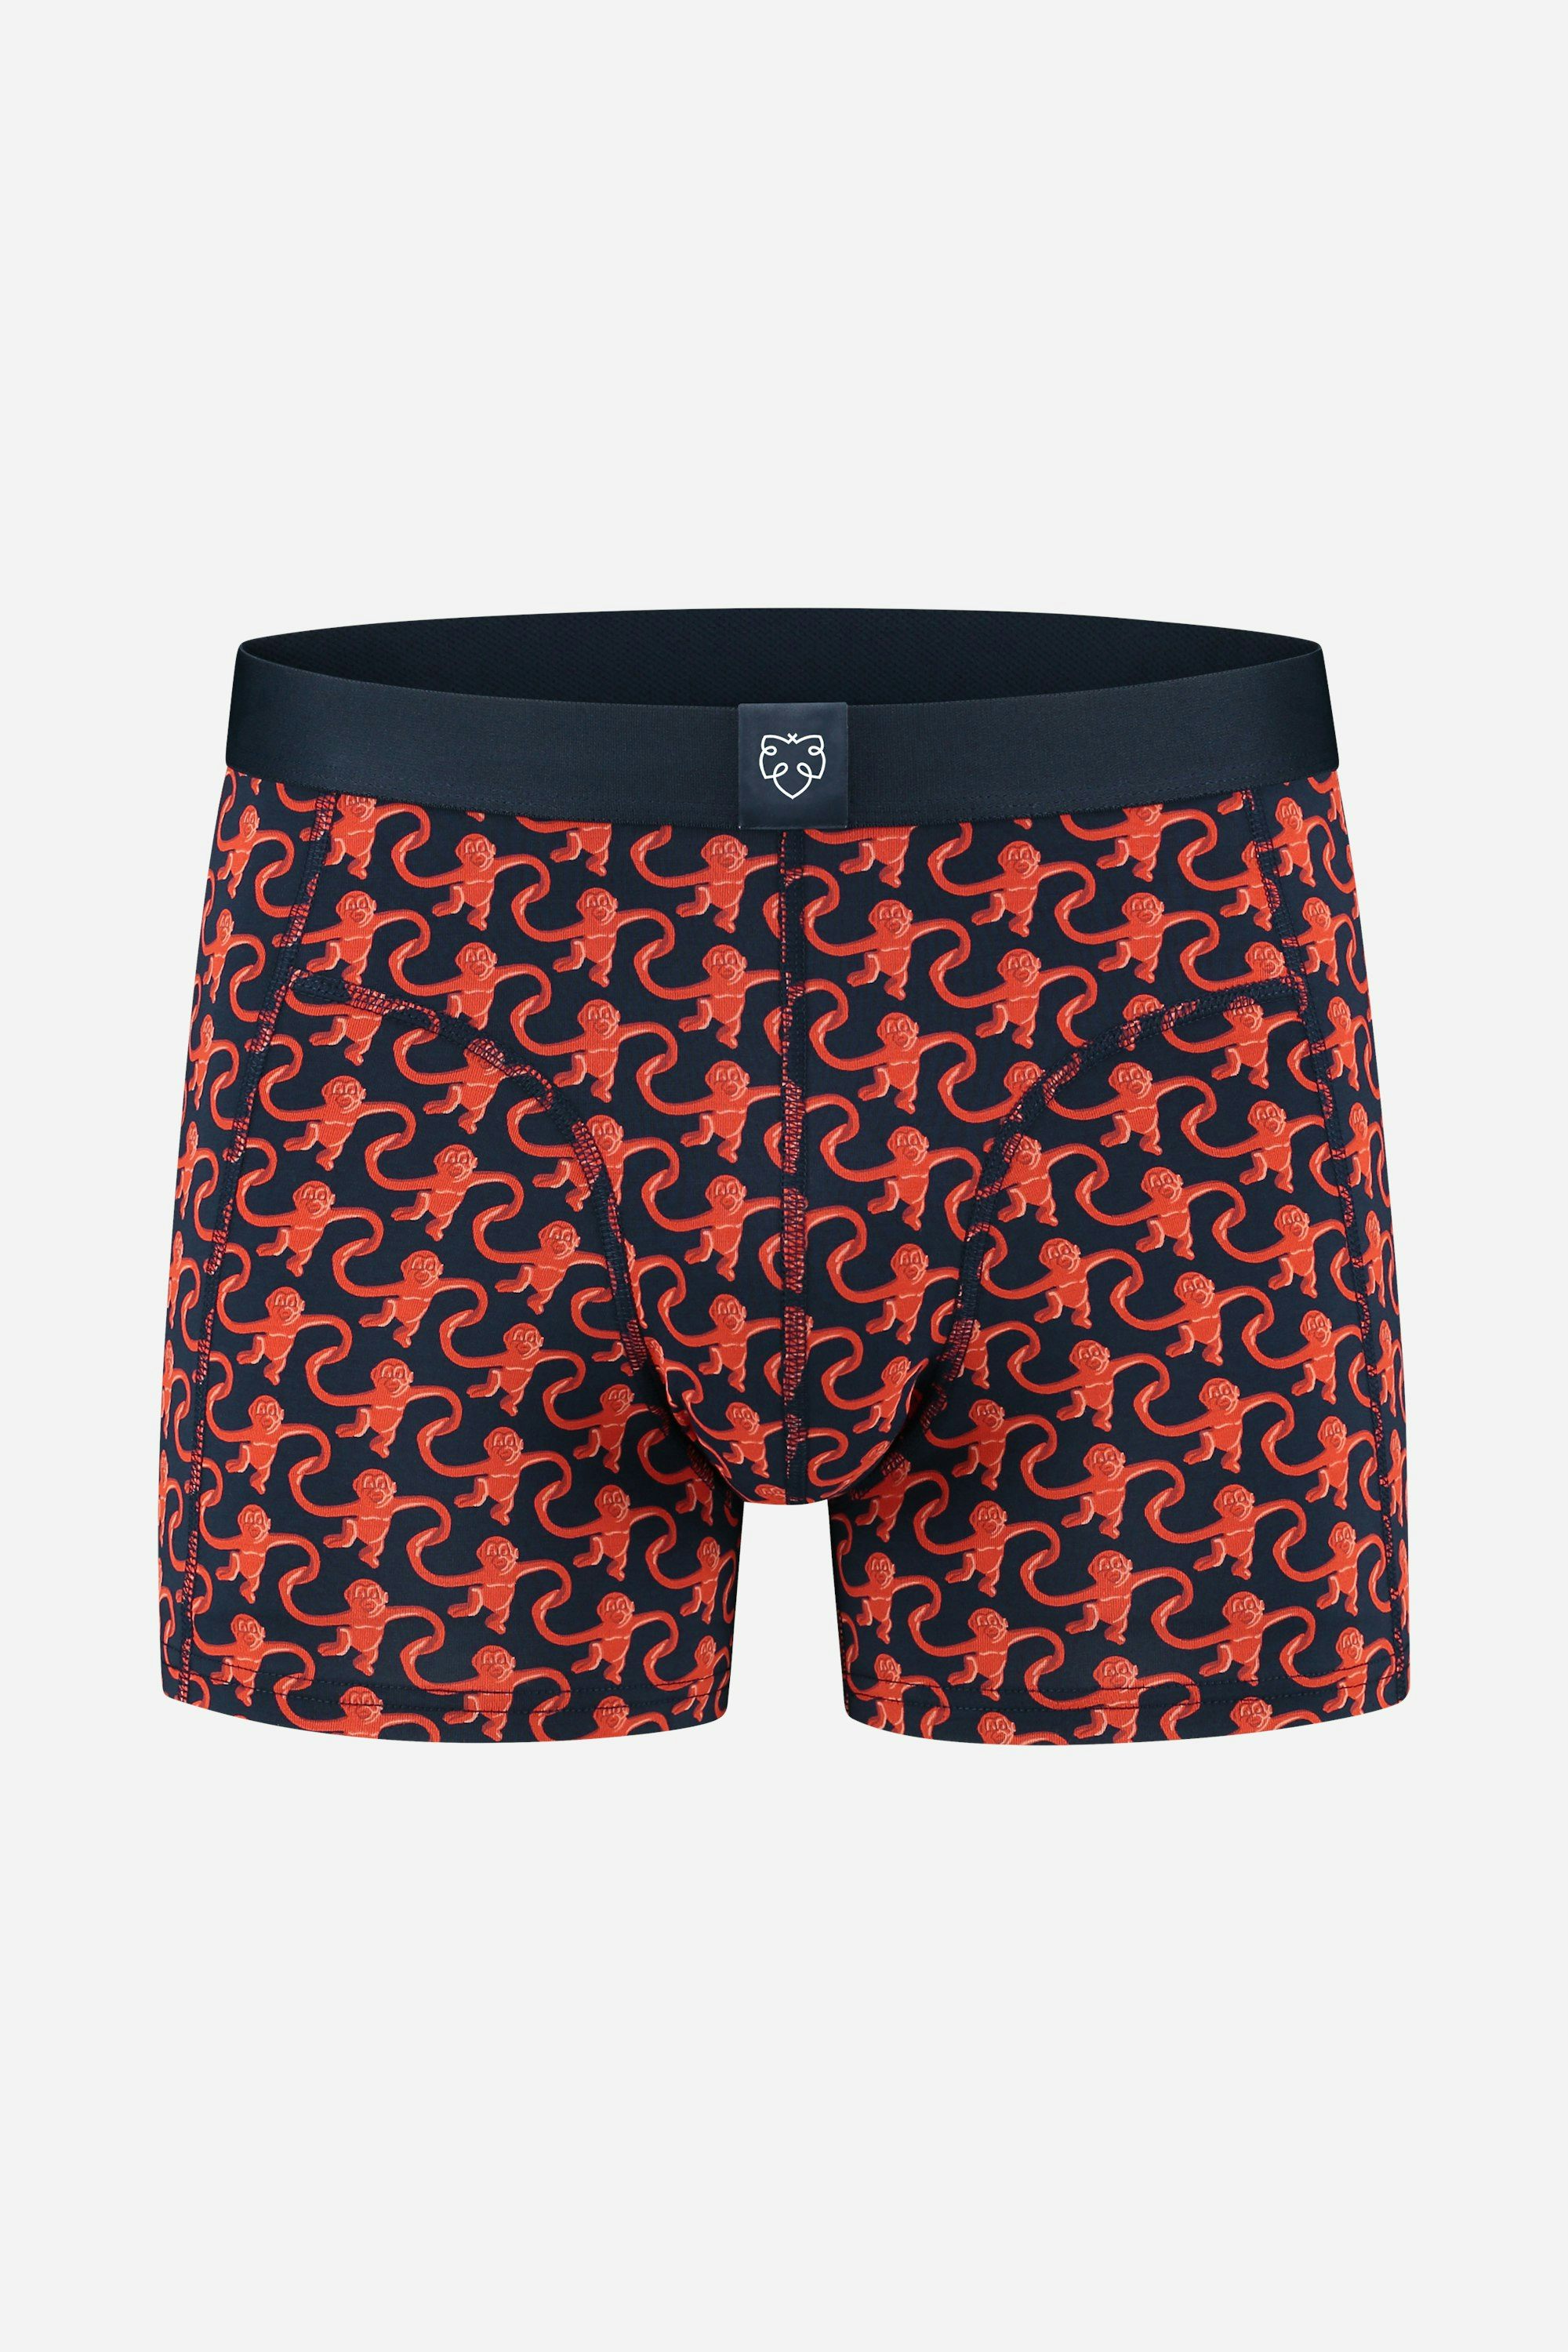 A-dam blue boxer briefs with monkeys print from pure organic cotton